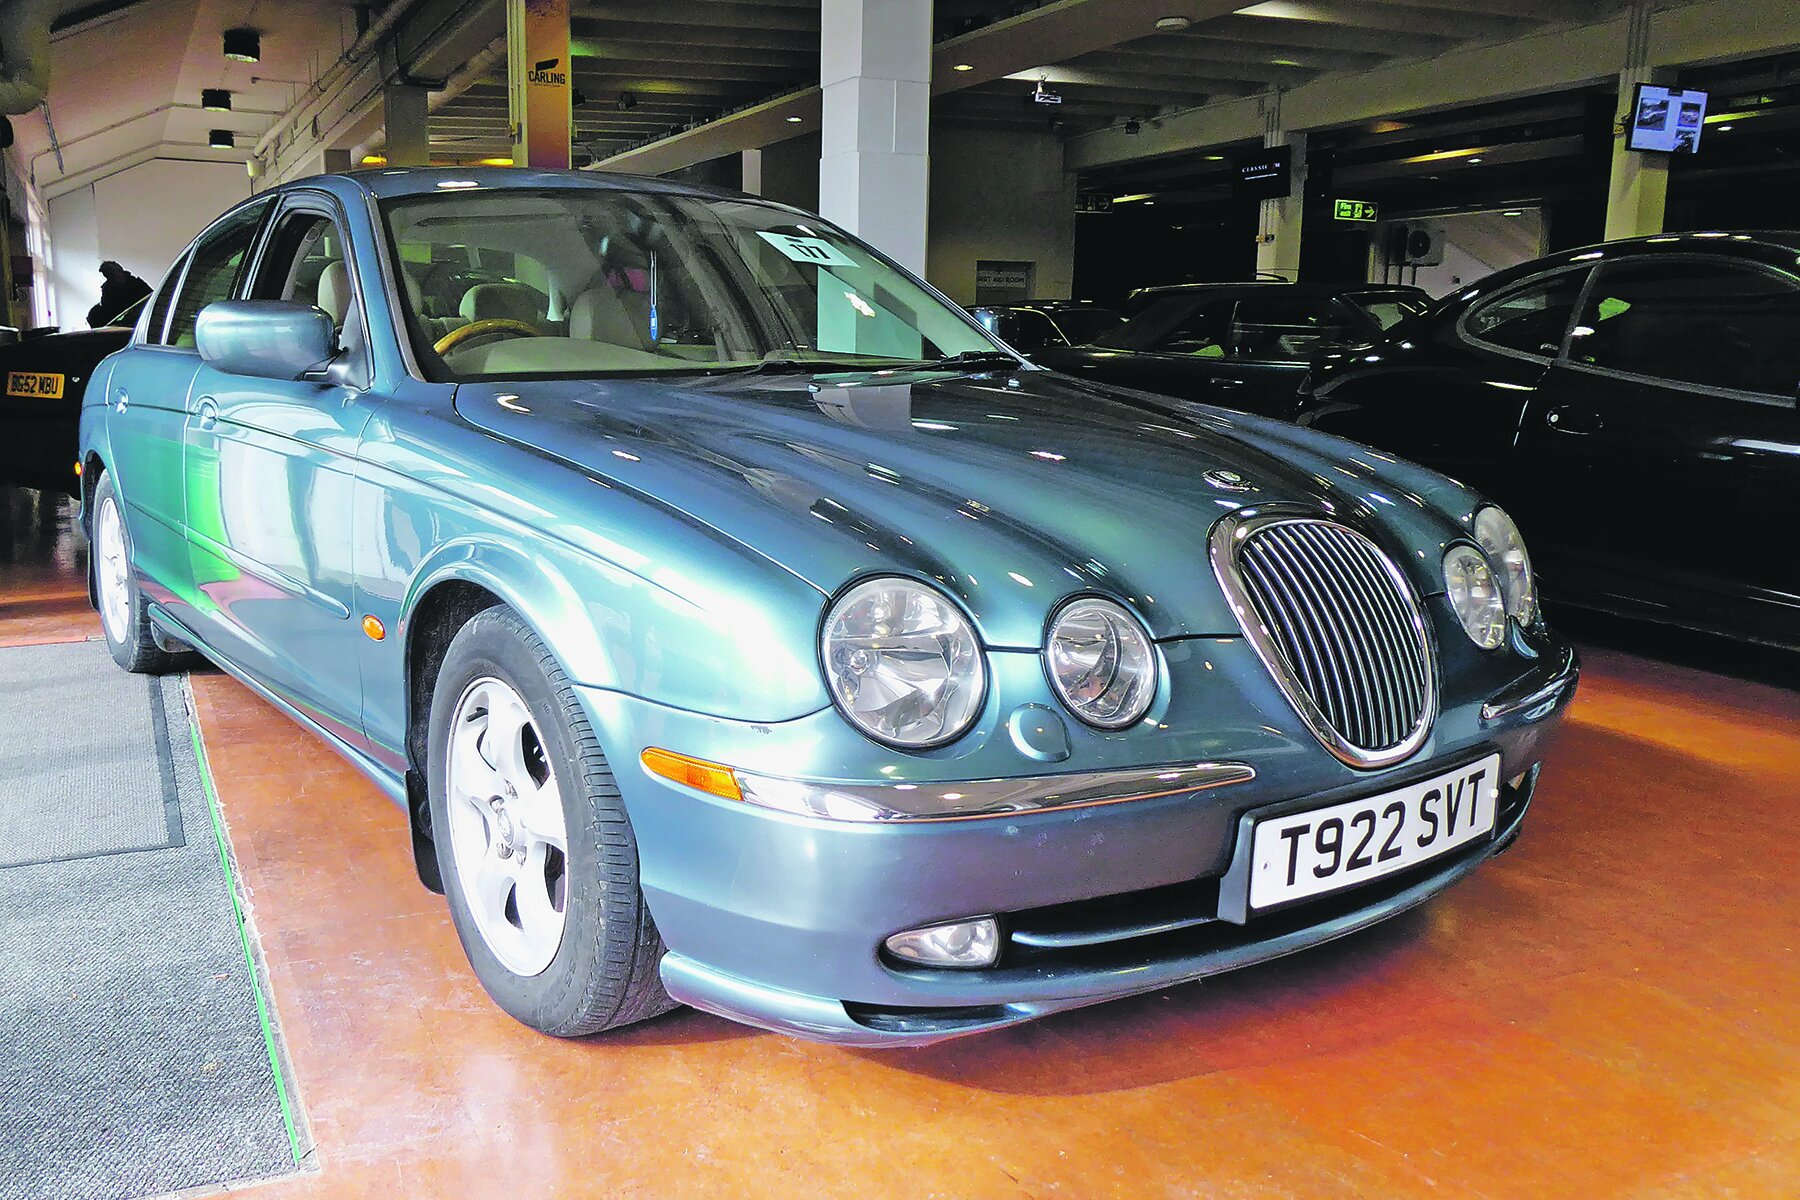 Jaguar S-Type: sold for £1050 at Barons in February 2020